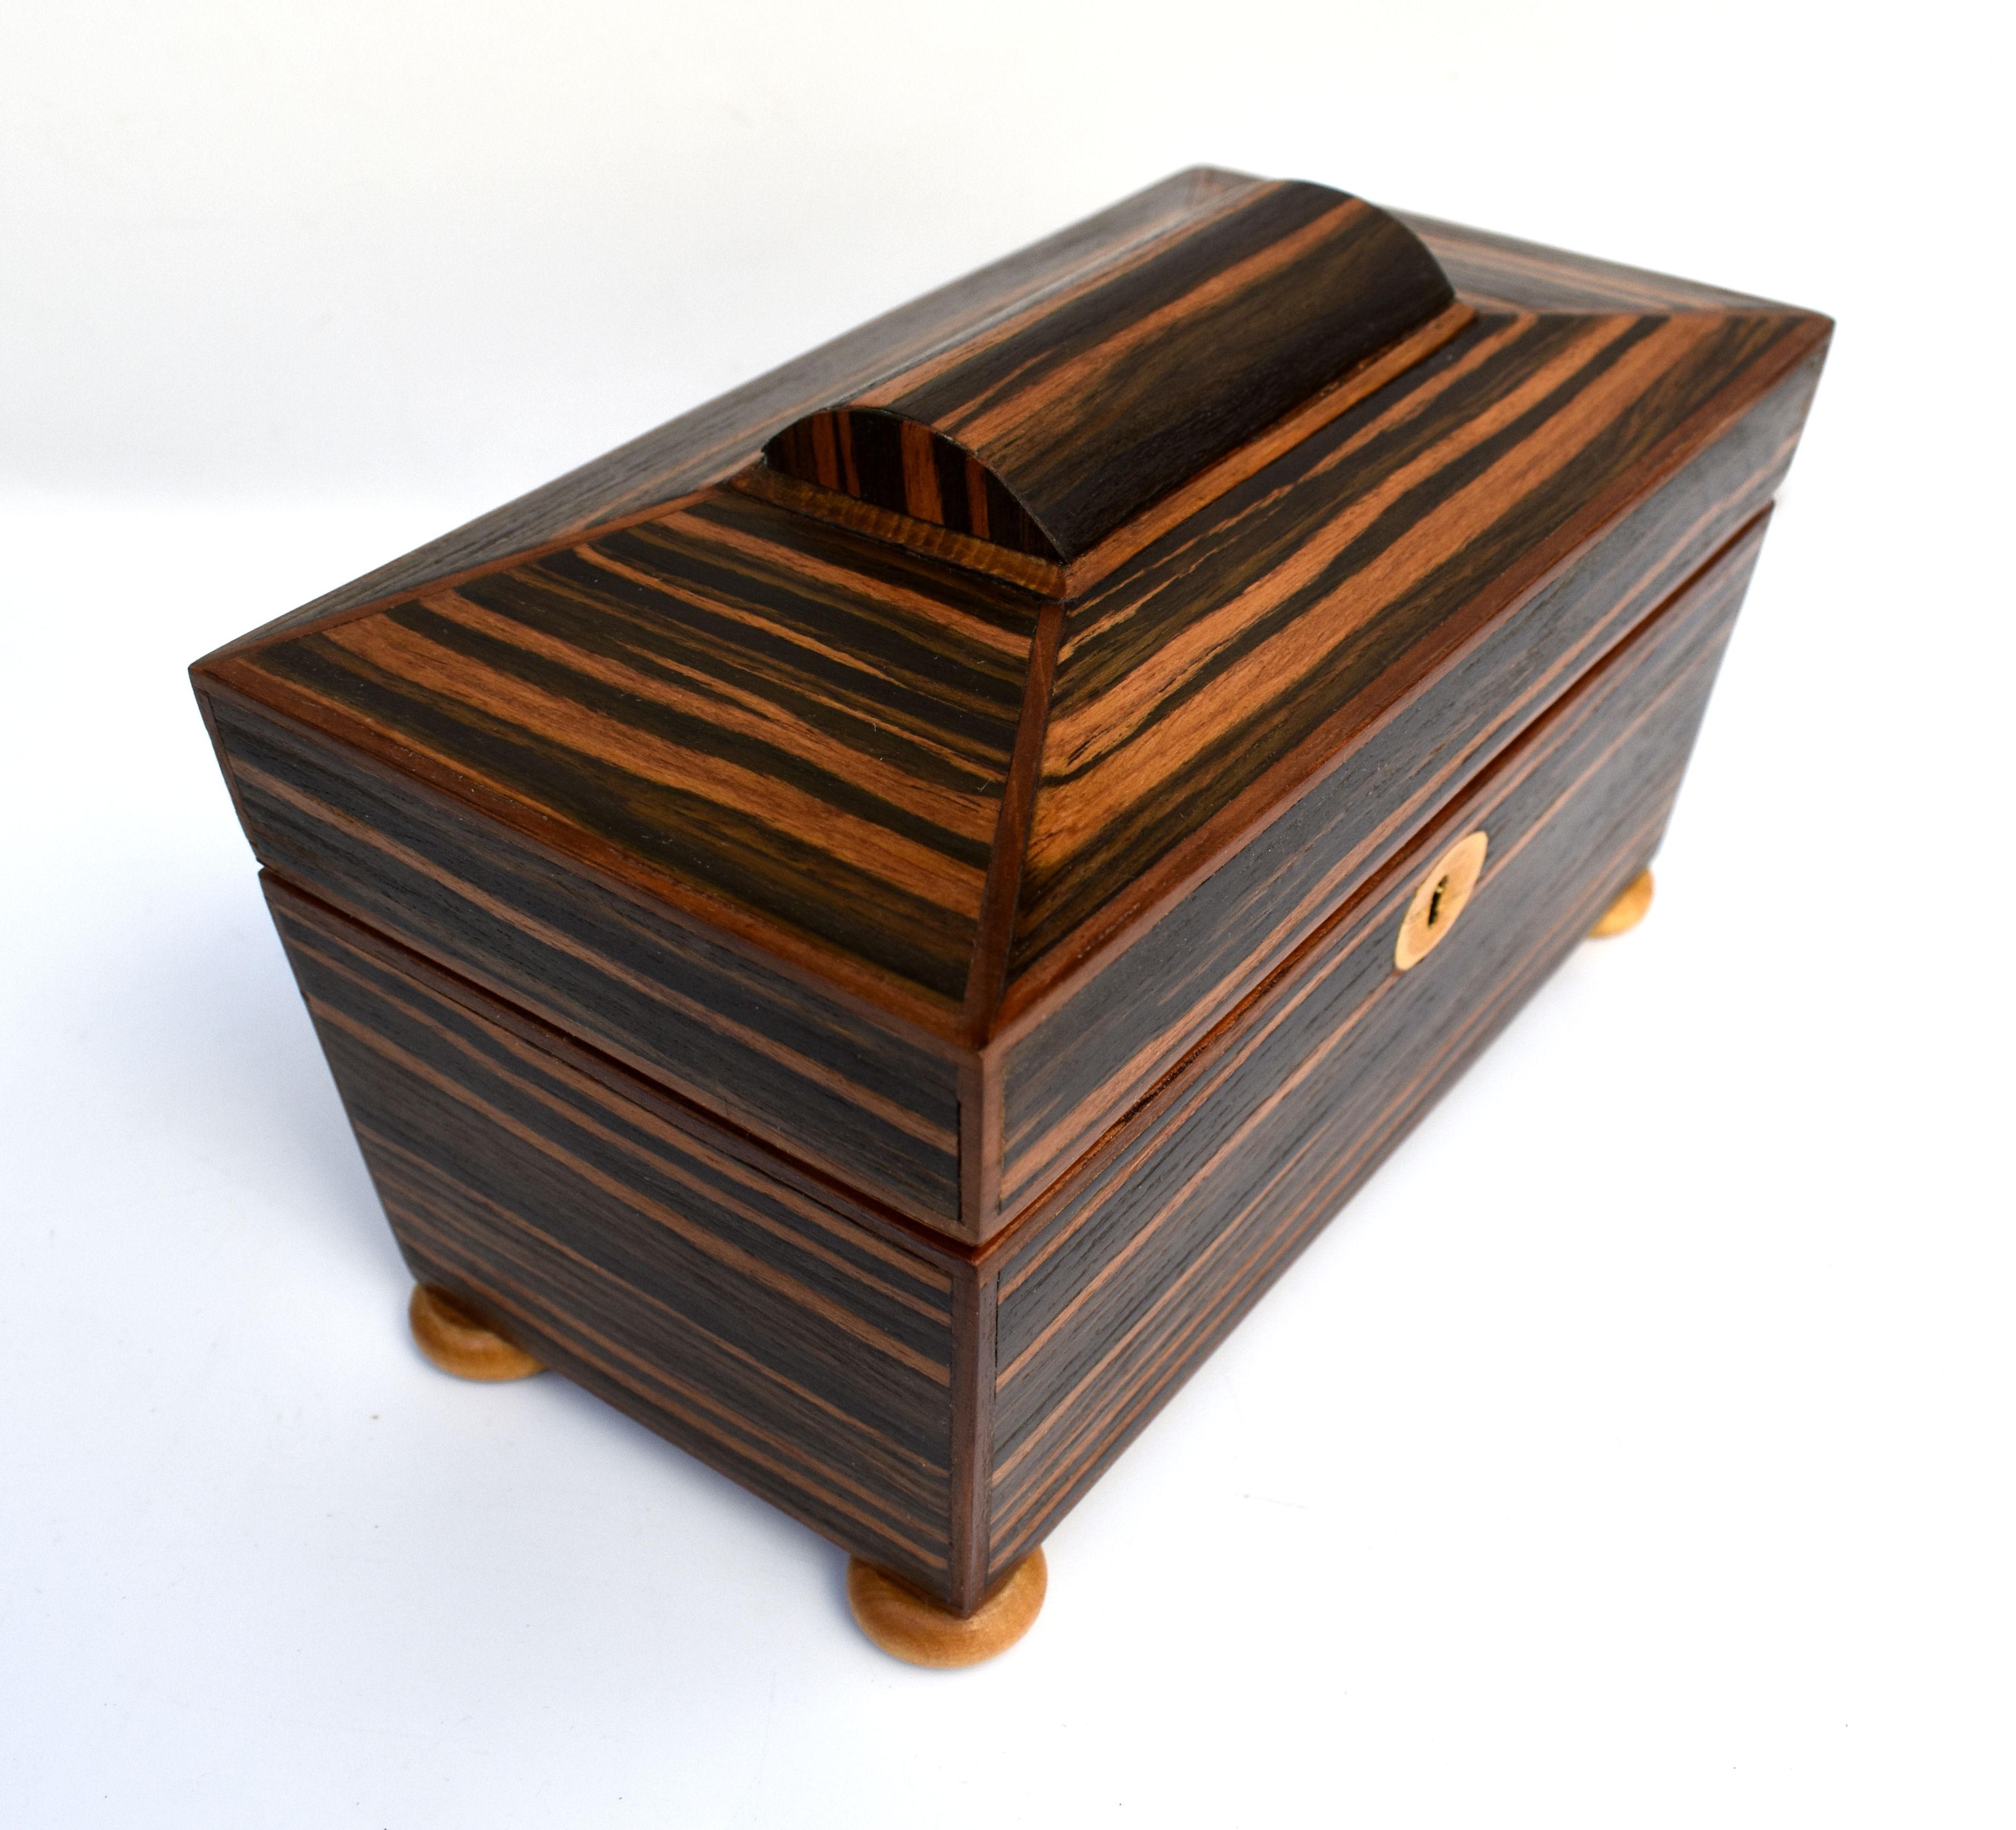 For your consideration is this superbly iconic looking Art Deco wooden box which we think was a tea caddy or for cigarettes originally. The exterior of the box is veneered in a beautiful ebony Macassar. The interior is an absolute marvel of surprise